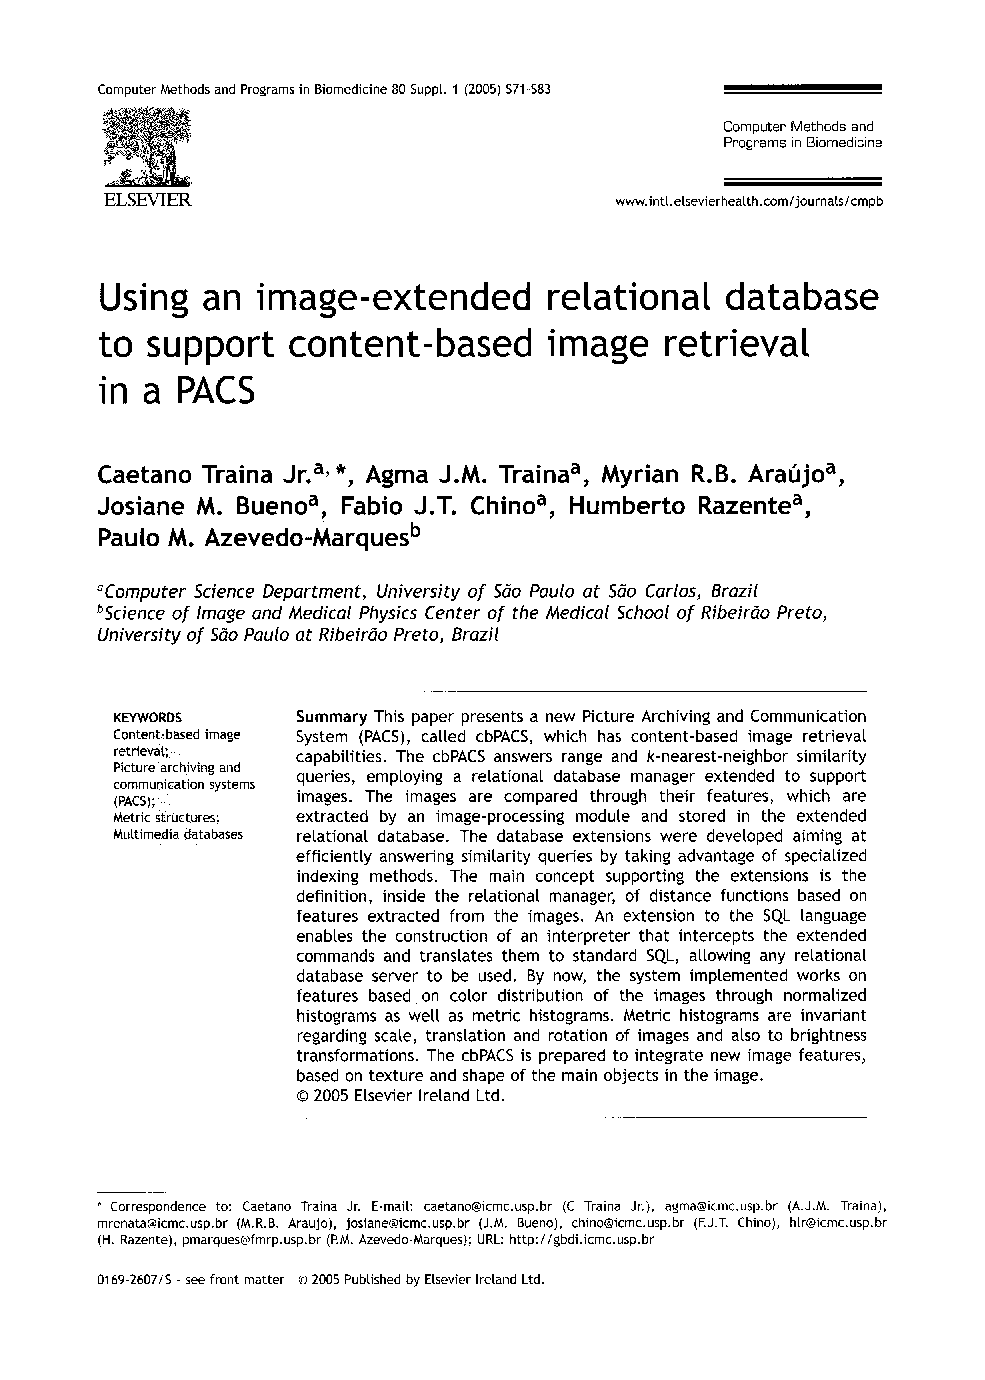 Using an image-extended relational database to support content-based image retrieval in a PACS